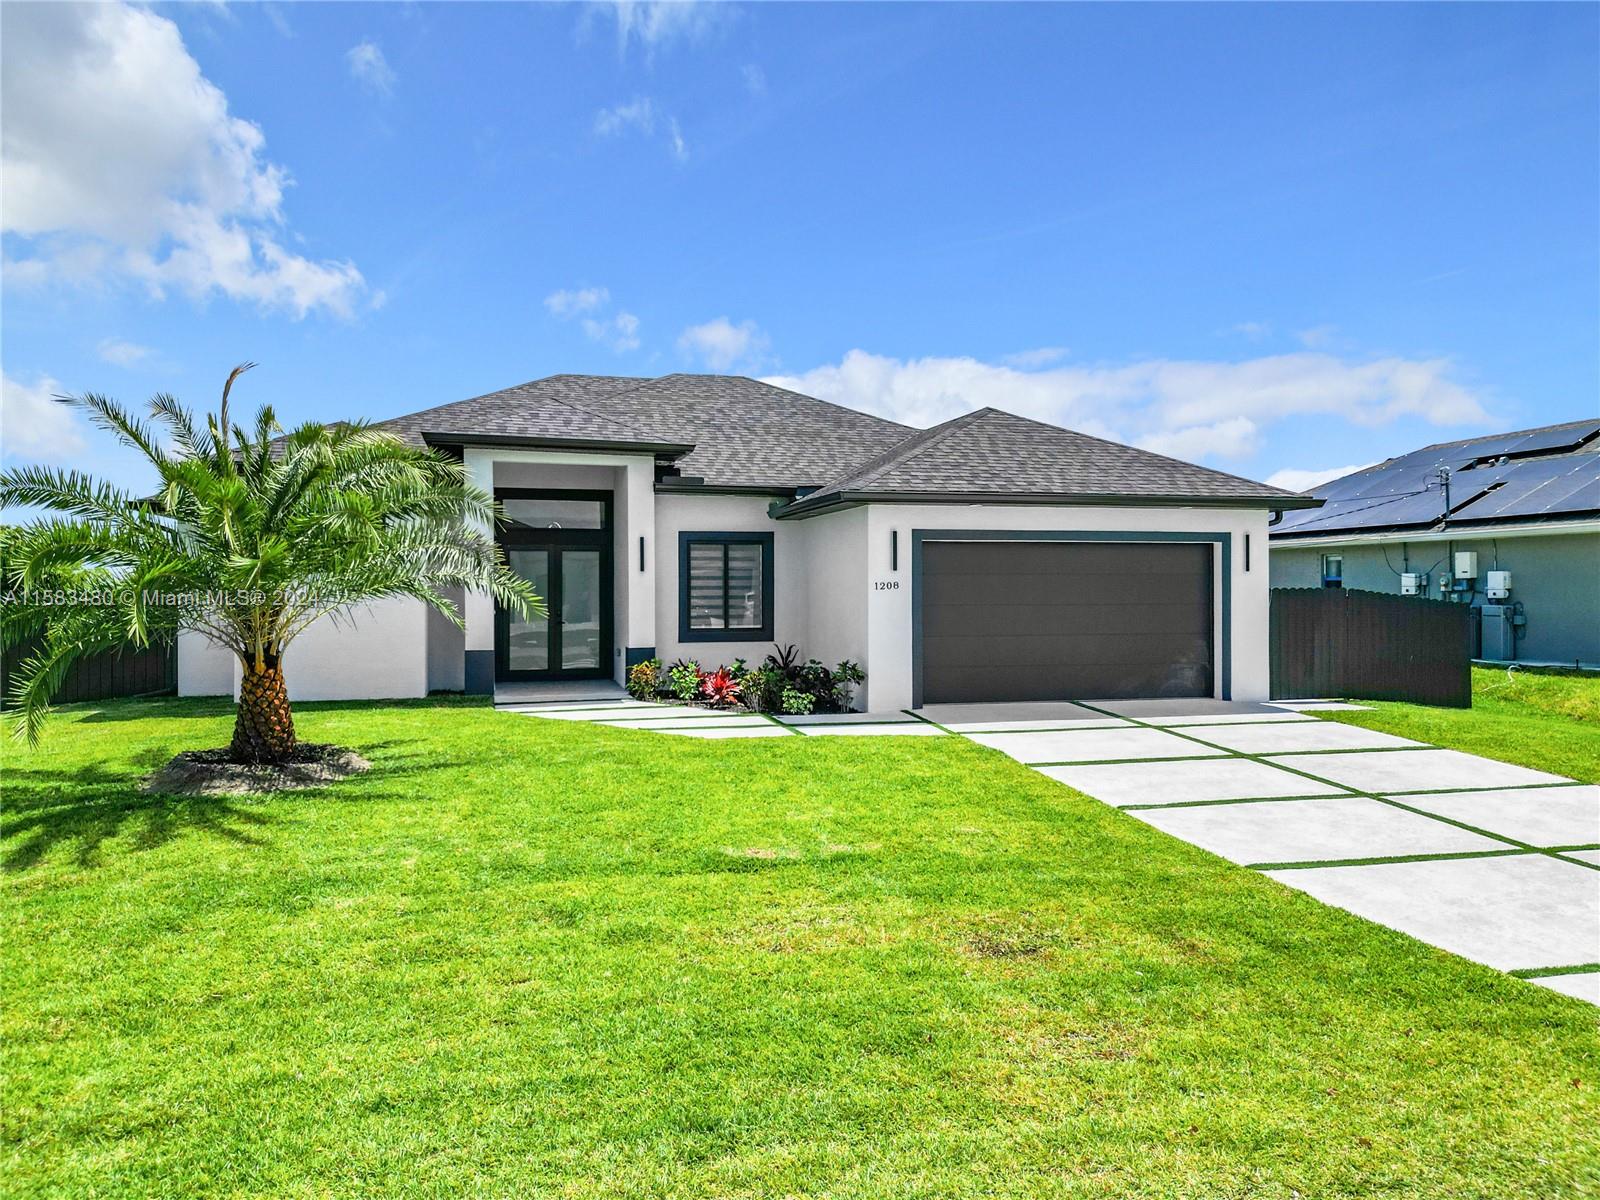 Property for Sale at 1208 Ne 9th St, Cape Coral, Lee County, Florida - Bedrooms: 4 
Bathrooms: 3  - $620,000